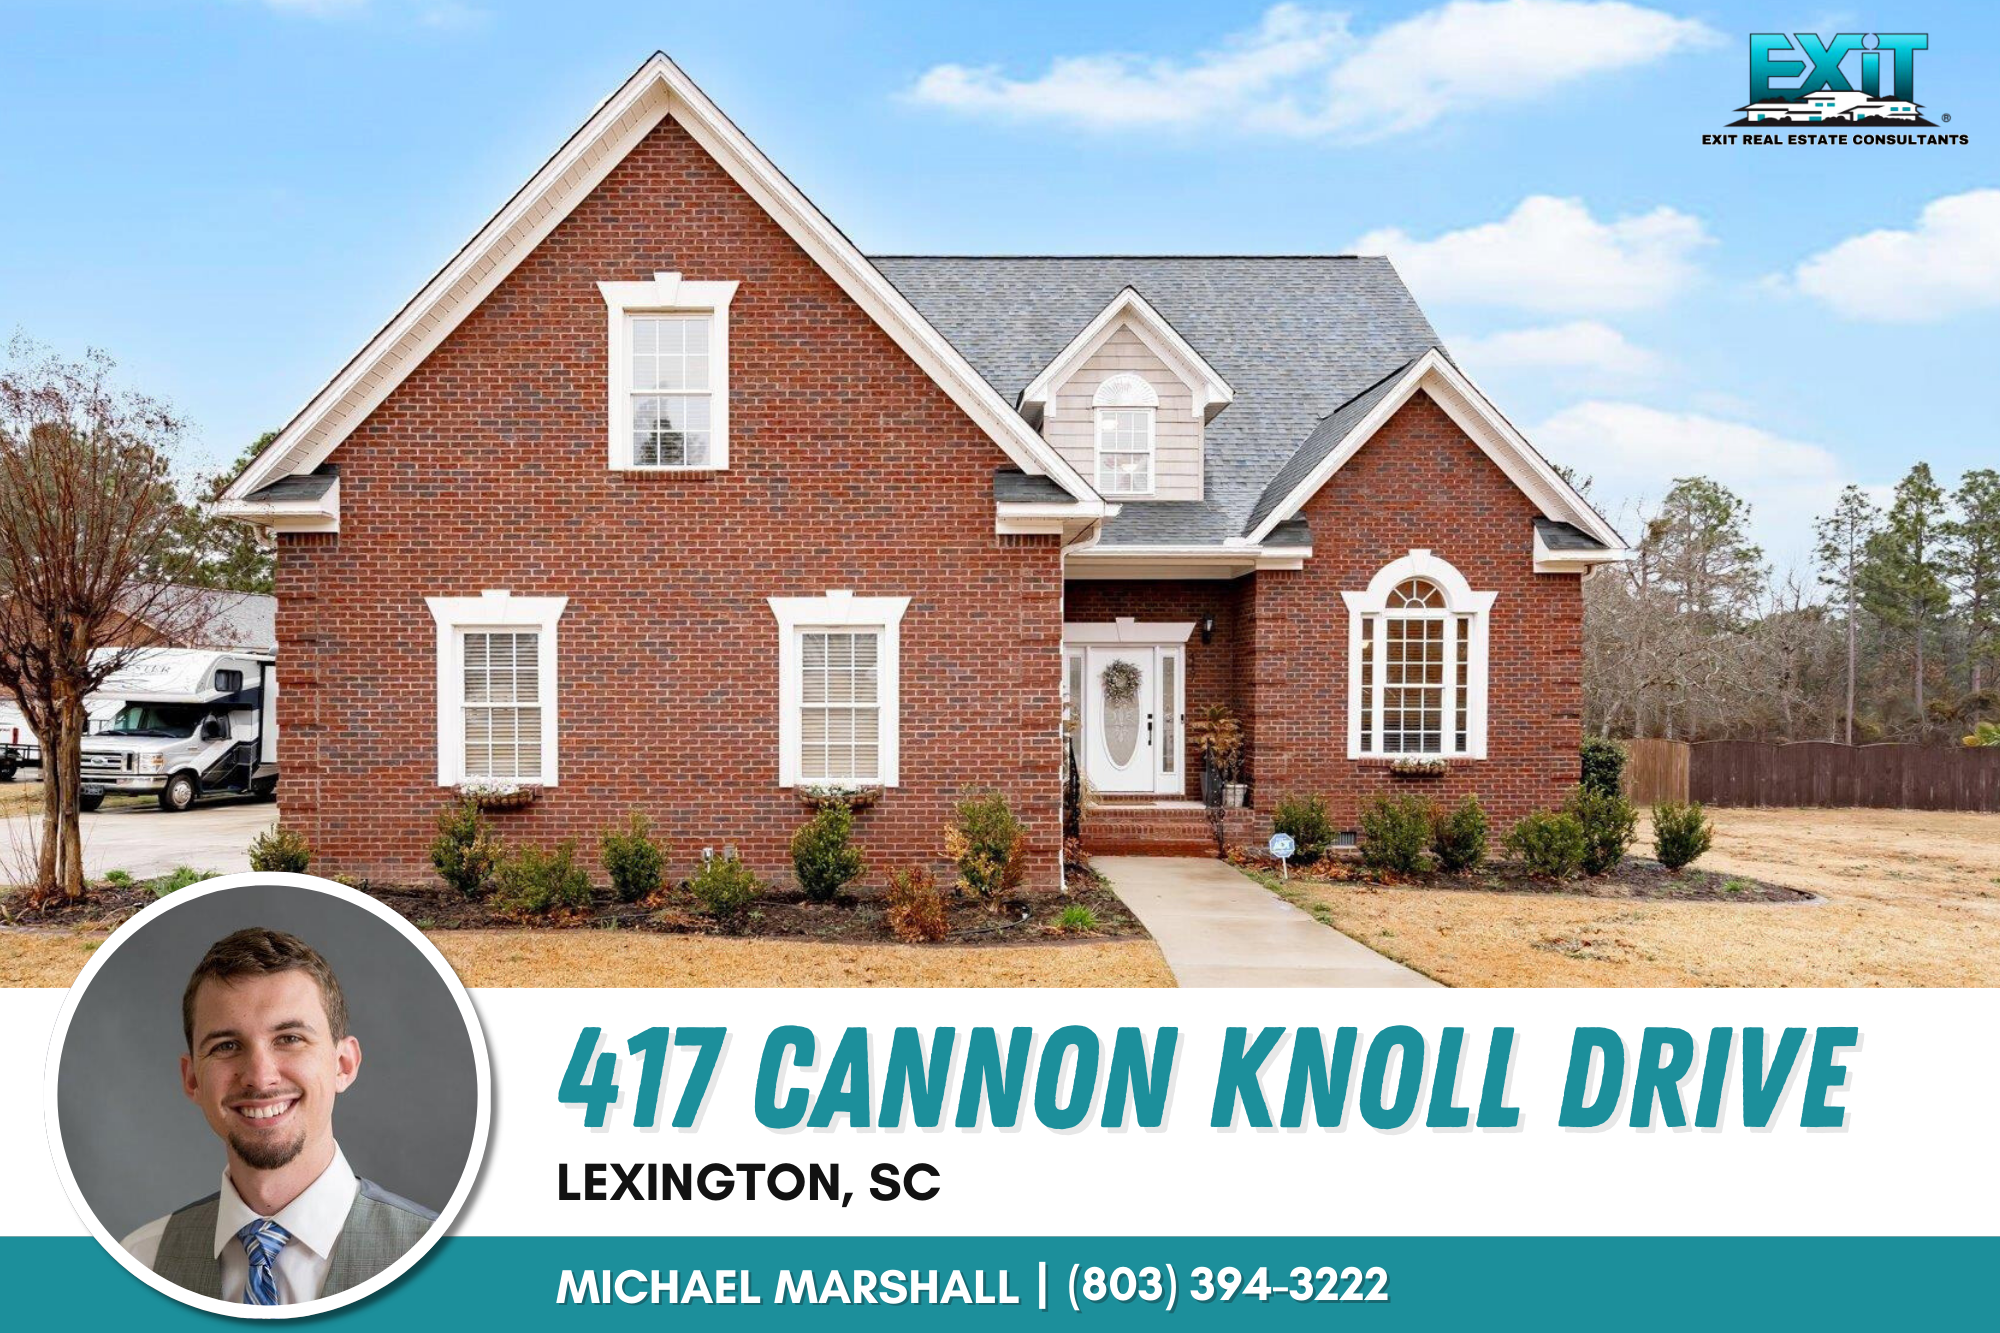 Just listed in Cannon Knoll - Lexington